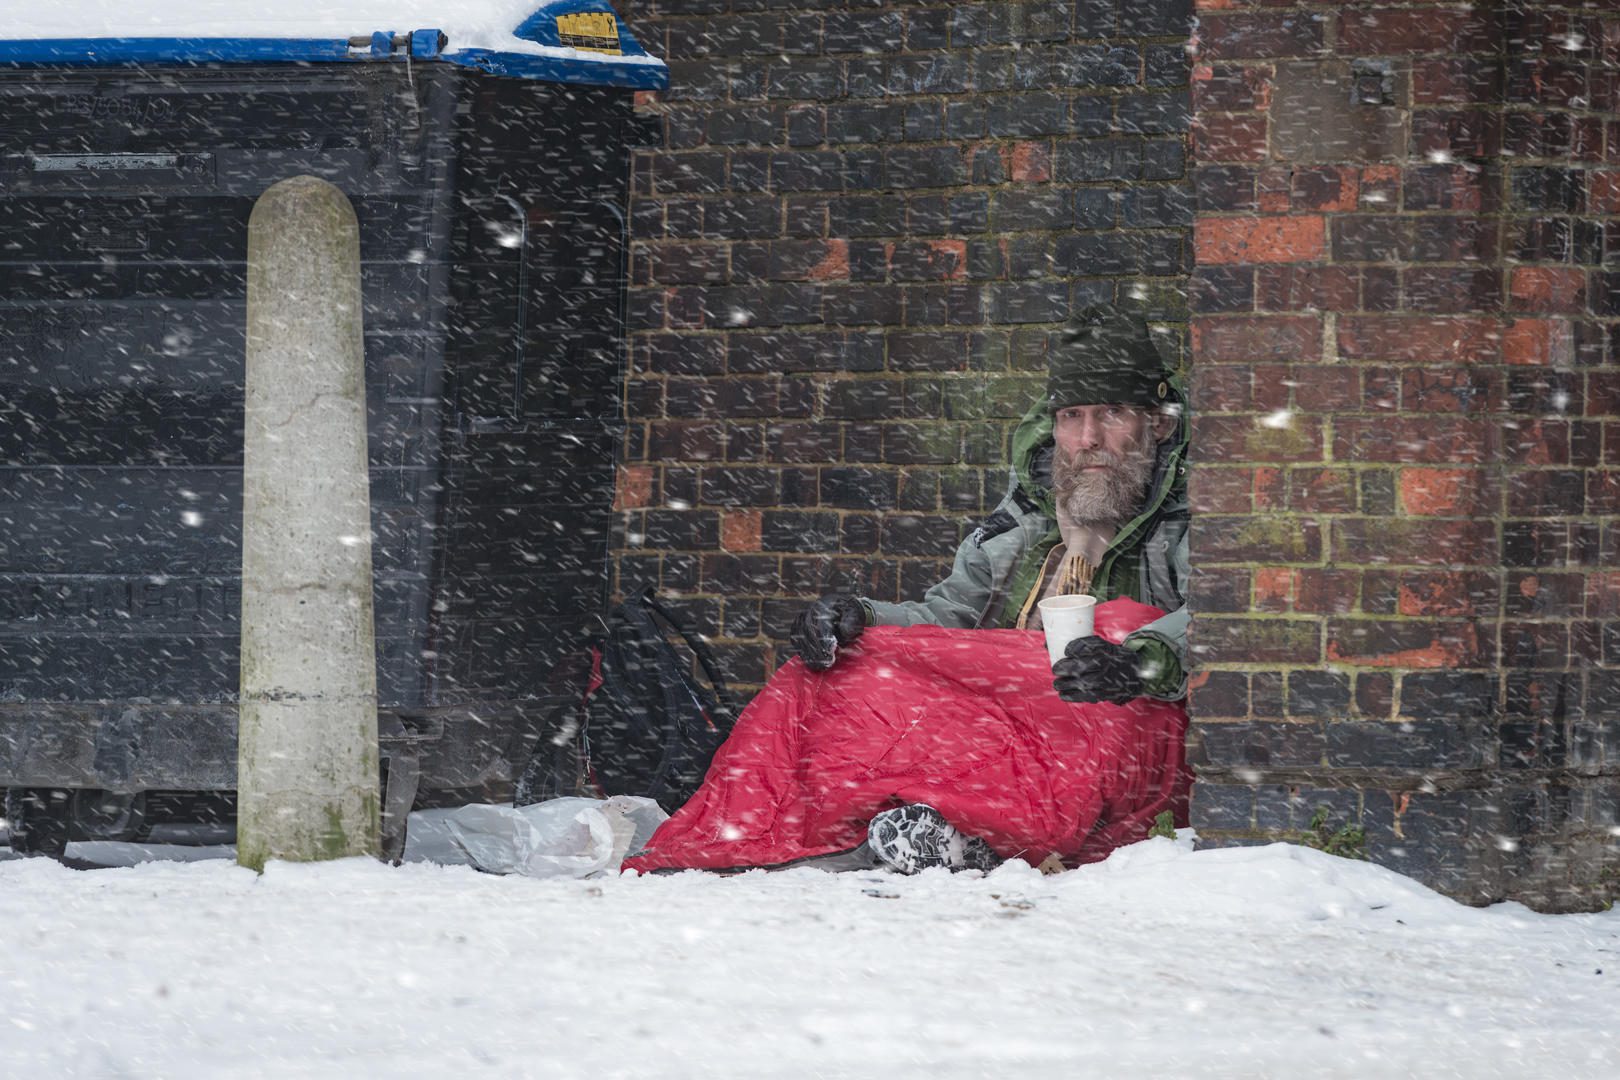 Featured Image for “How to help rough sleepers during winter”